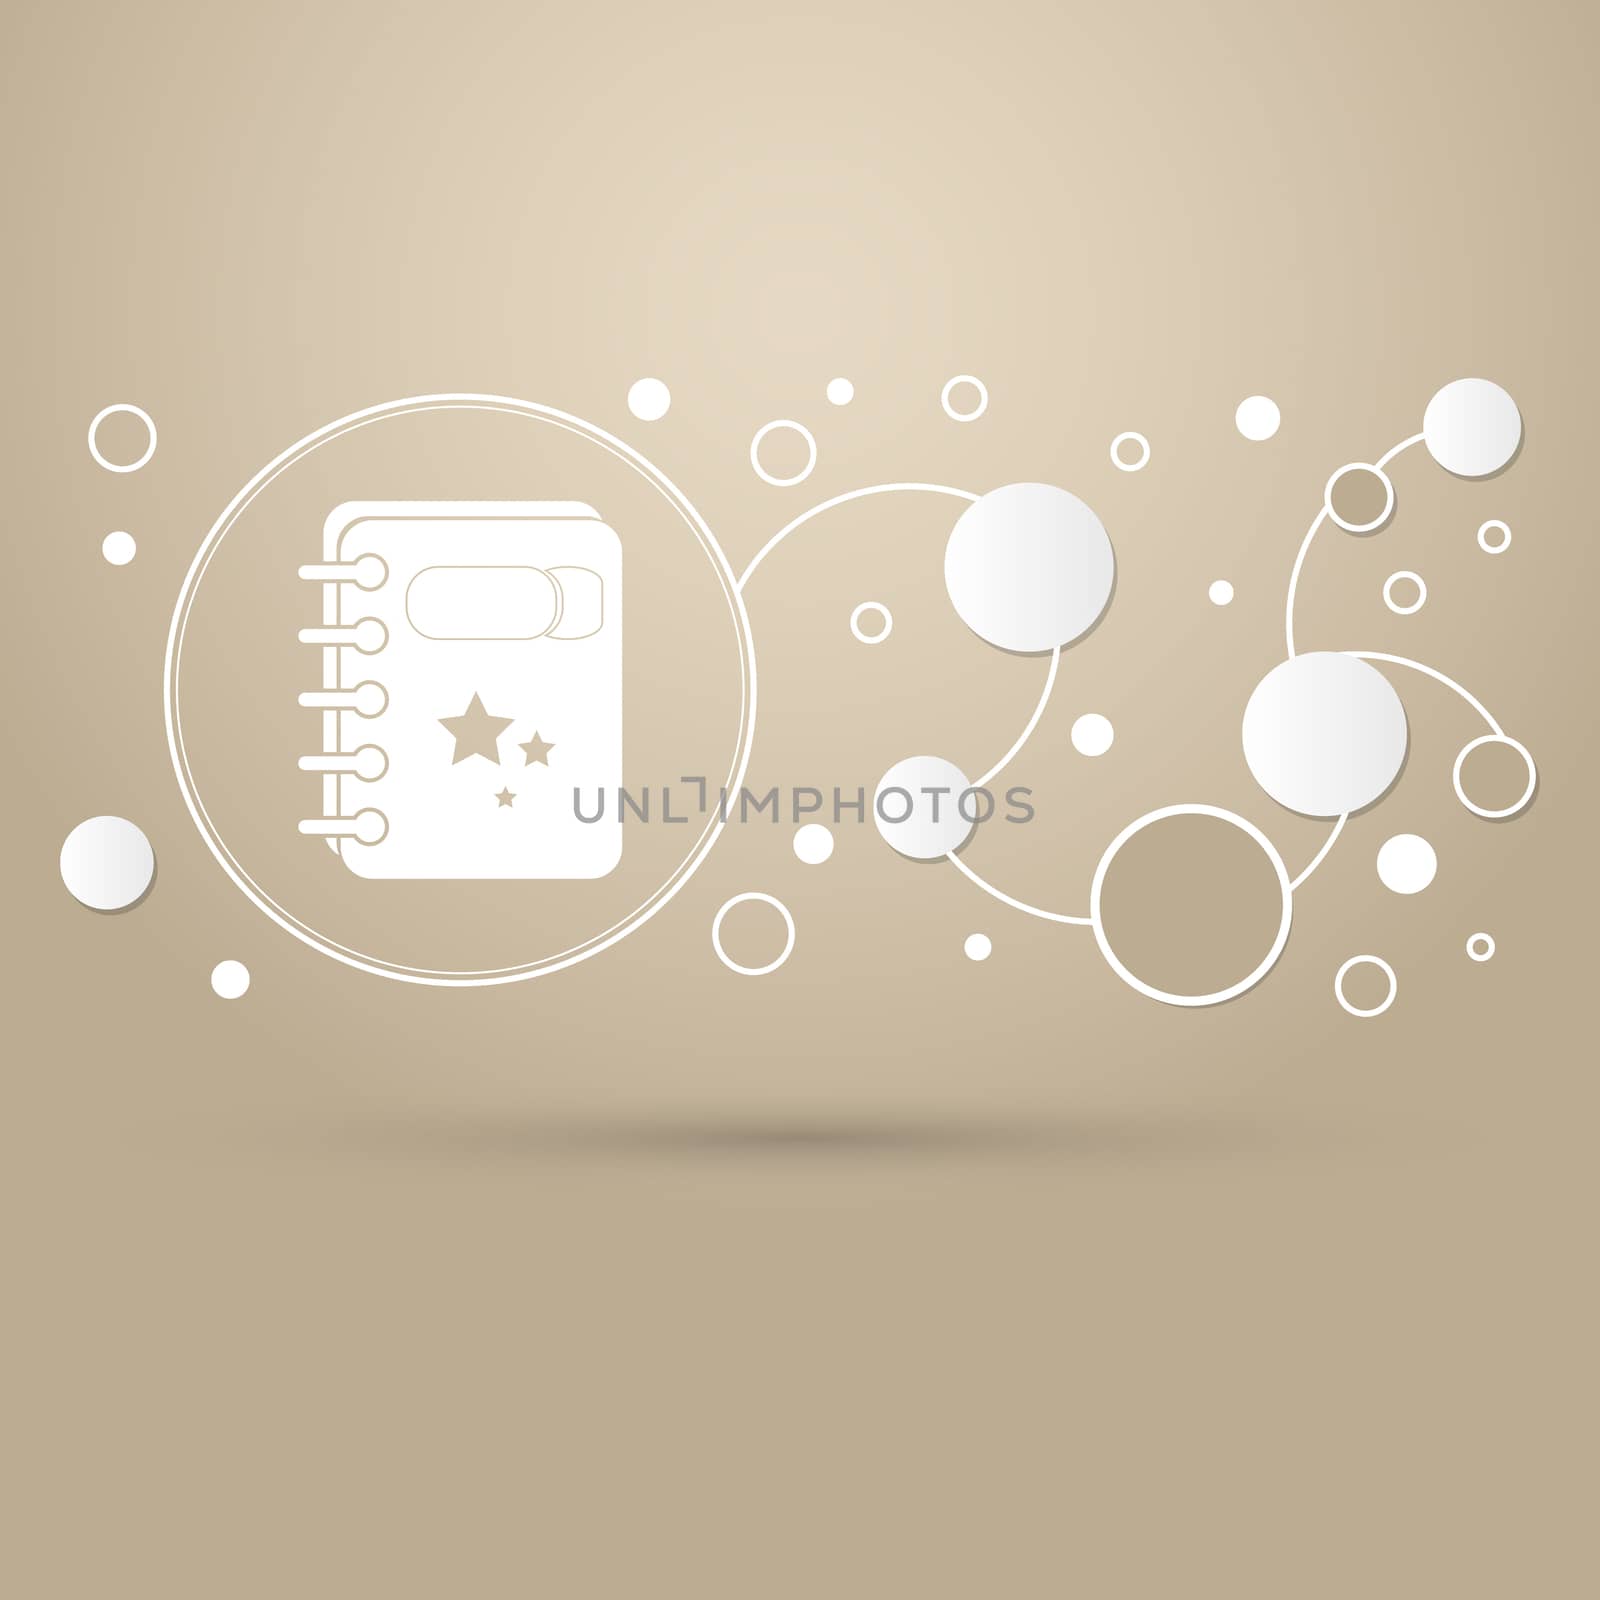 book Icon on a brown background with elegant style and modern design infographic.  by Adamchuk